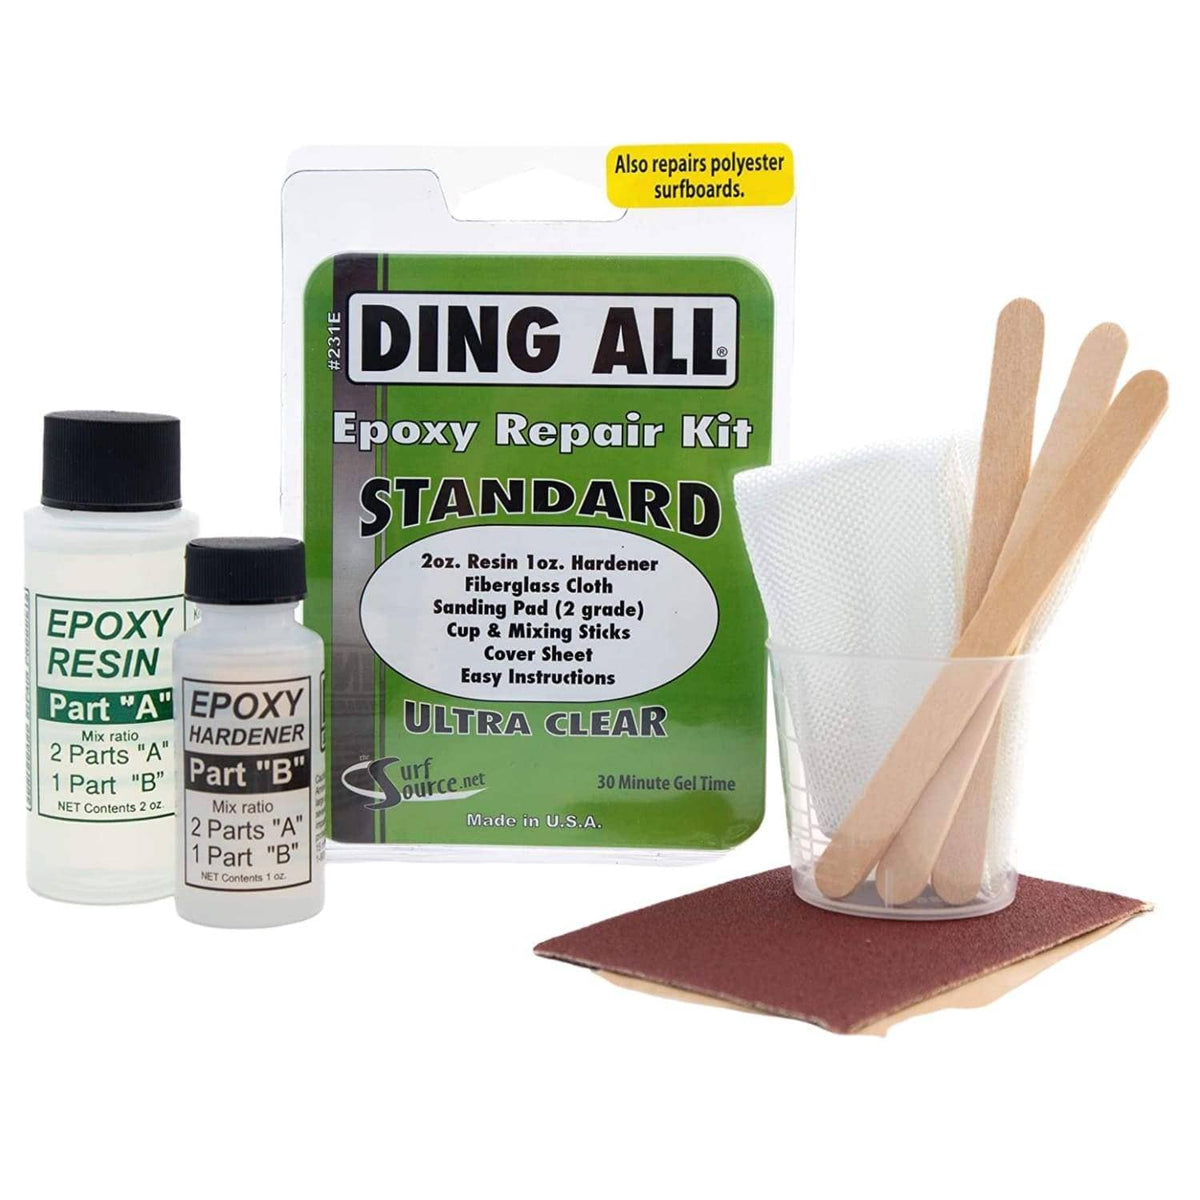 Ding All Standard Epoxy Repair Kit N/A 3oz - Epoxy Resin Surfboard Repair by Ding All